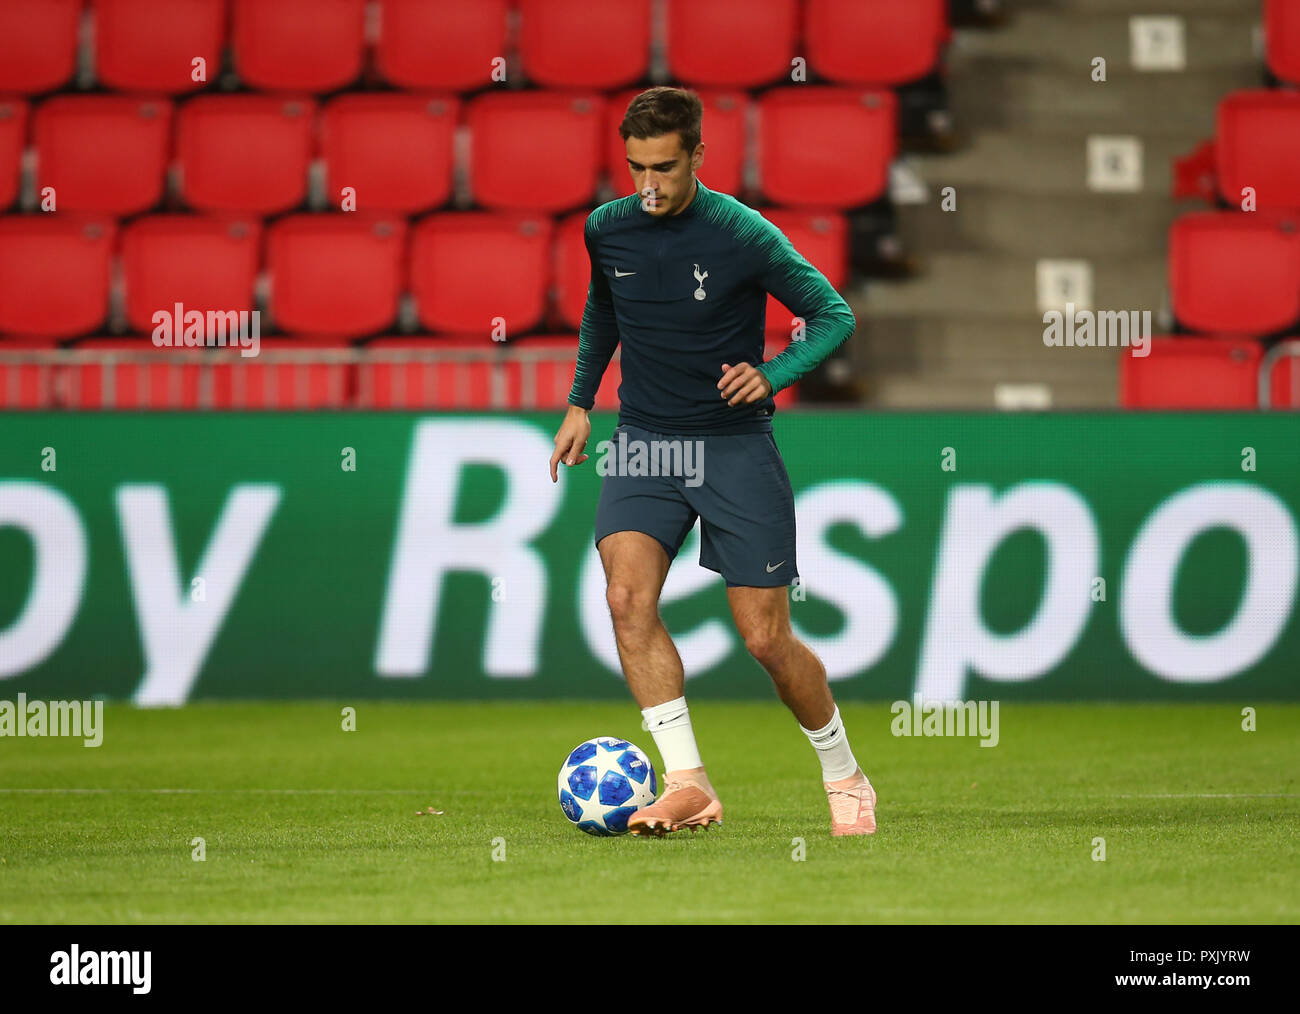 Eindhoven, Netherlands. October 23. 2018 Tottenham Hotspur's Harry Winks during Tottenham Hotspur training session ahead of the UEFA Champions League Group B match against PSV Eindhoven at Phillips stadium, in Eindhoven, Netherlands, on 23 Oct , 2018  Credit Action Foto Sport Credit: Action Foto Sport/Alamy Live News Stock Photo